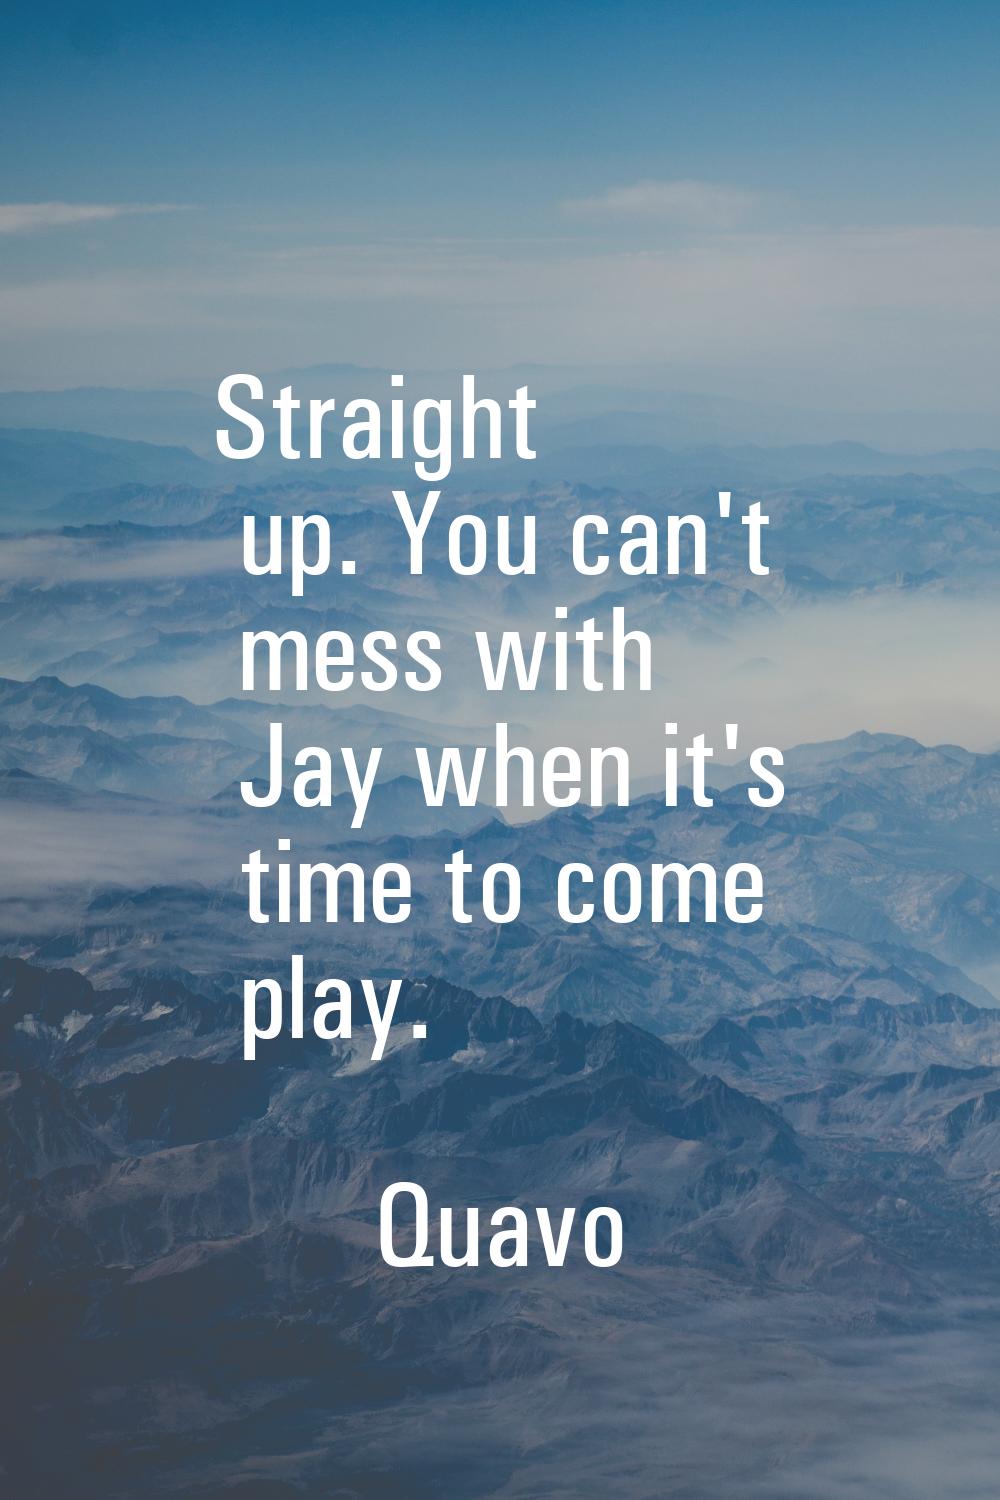 Straight up. You can't mess with Jay when it's time to come play.